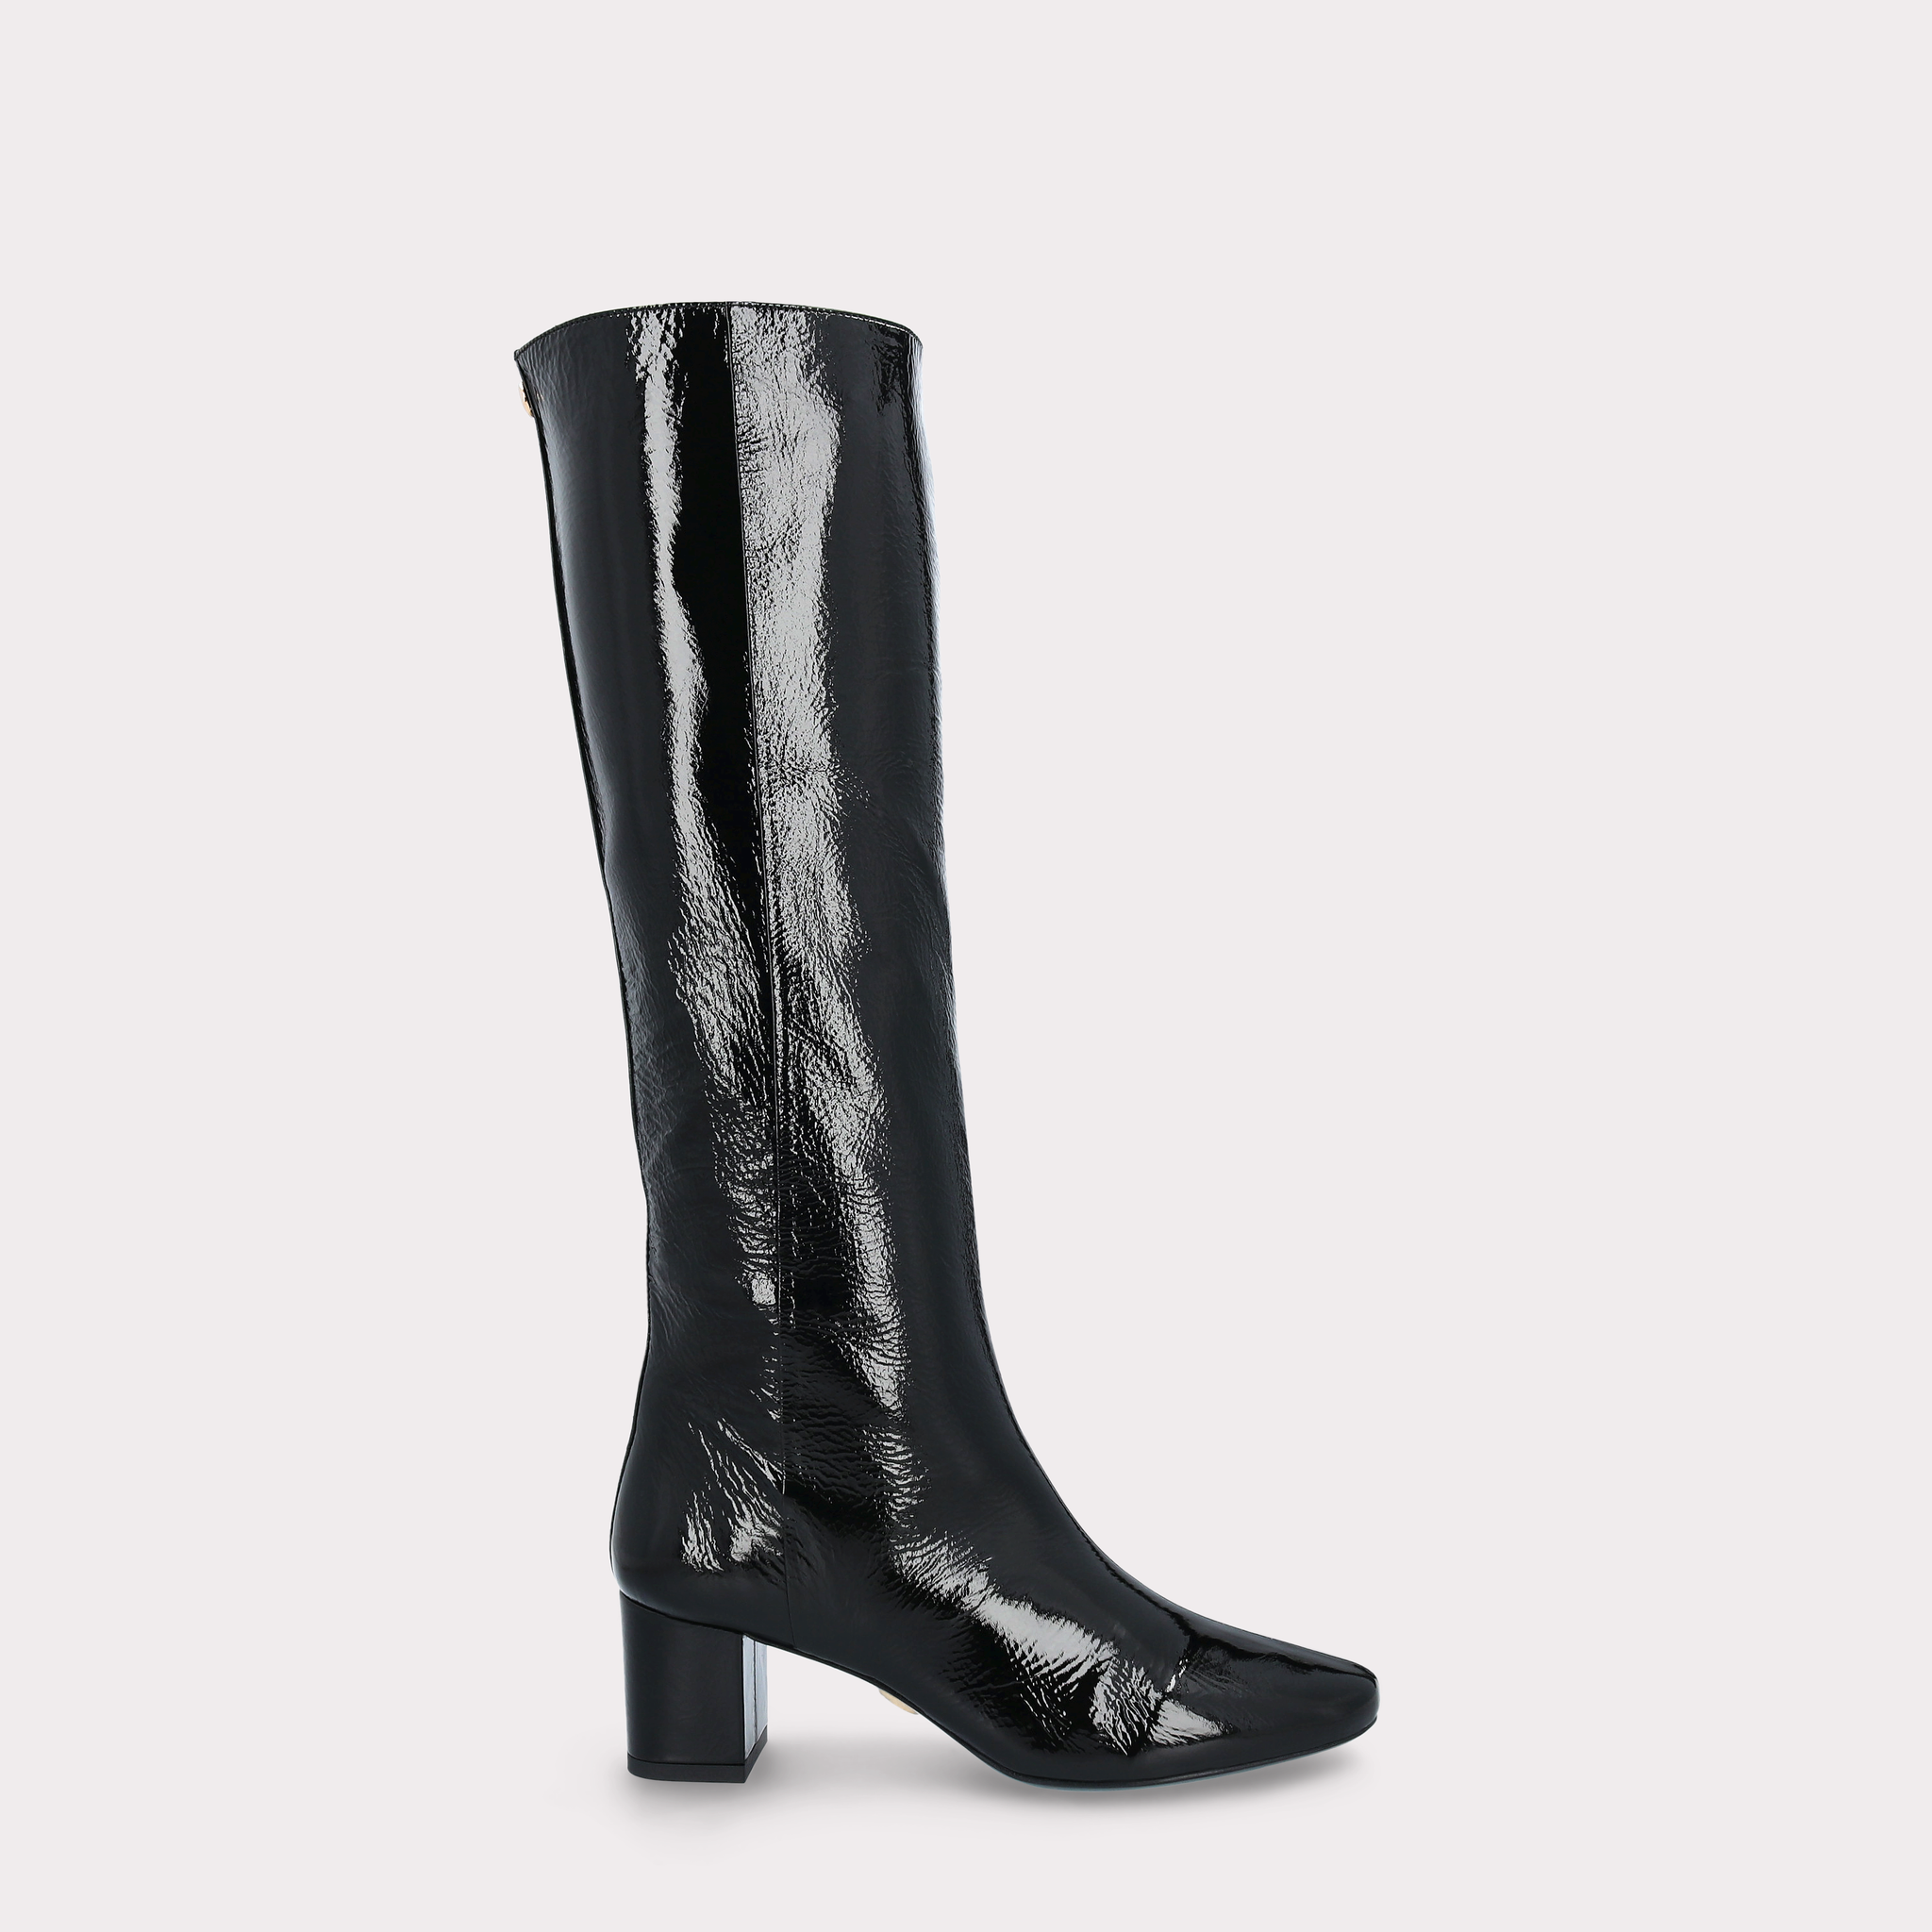 DEBBY TUBO 01 BLACK CRUSHED PATENT LEATHER BOOTS